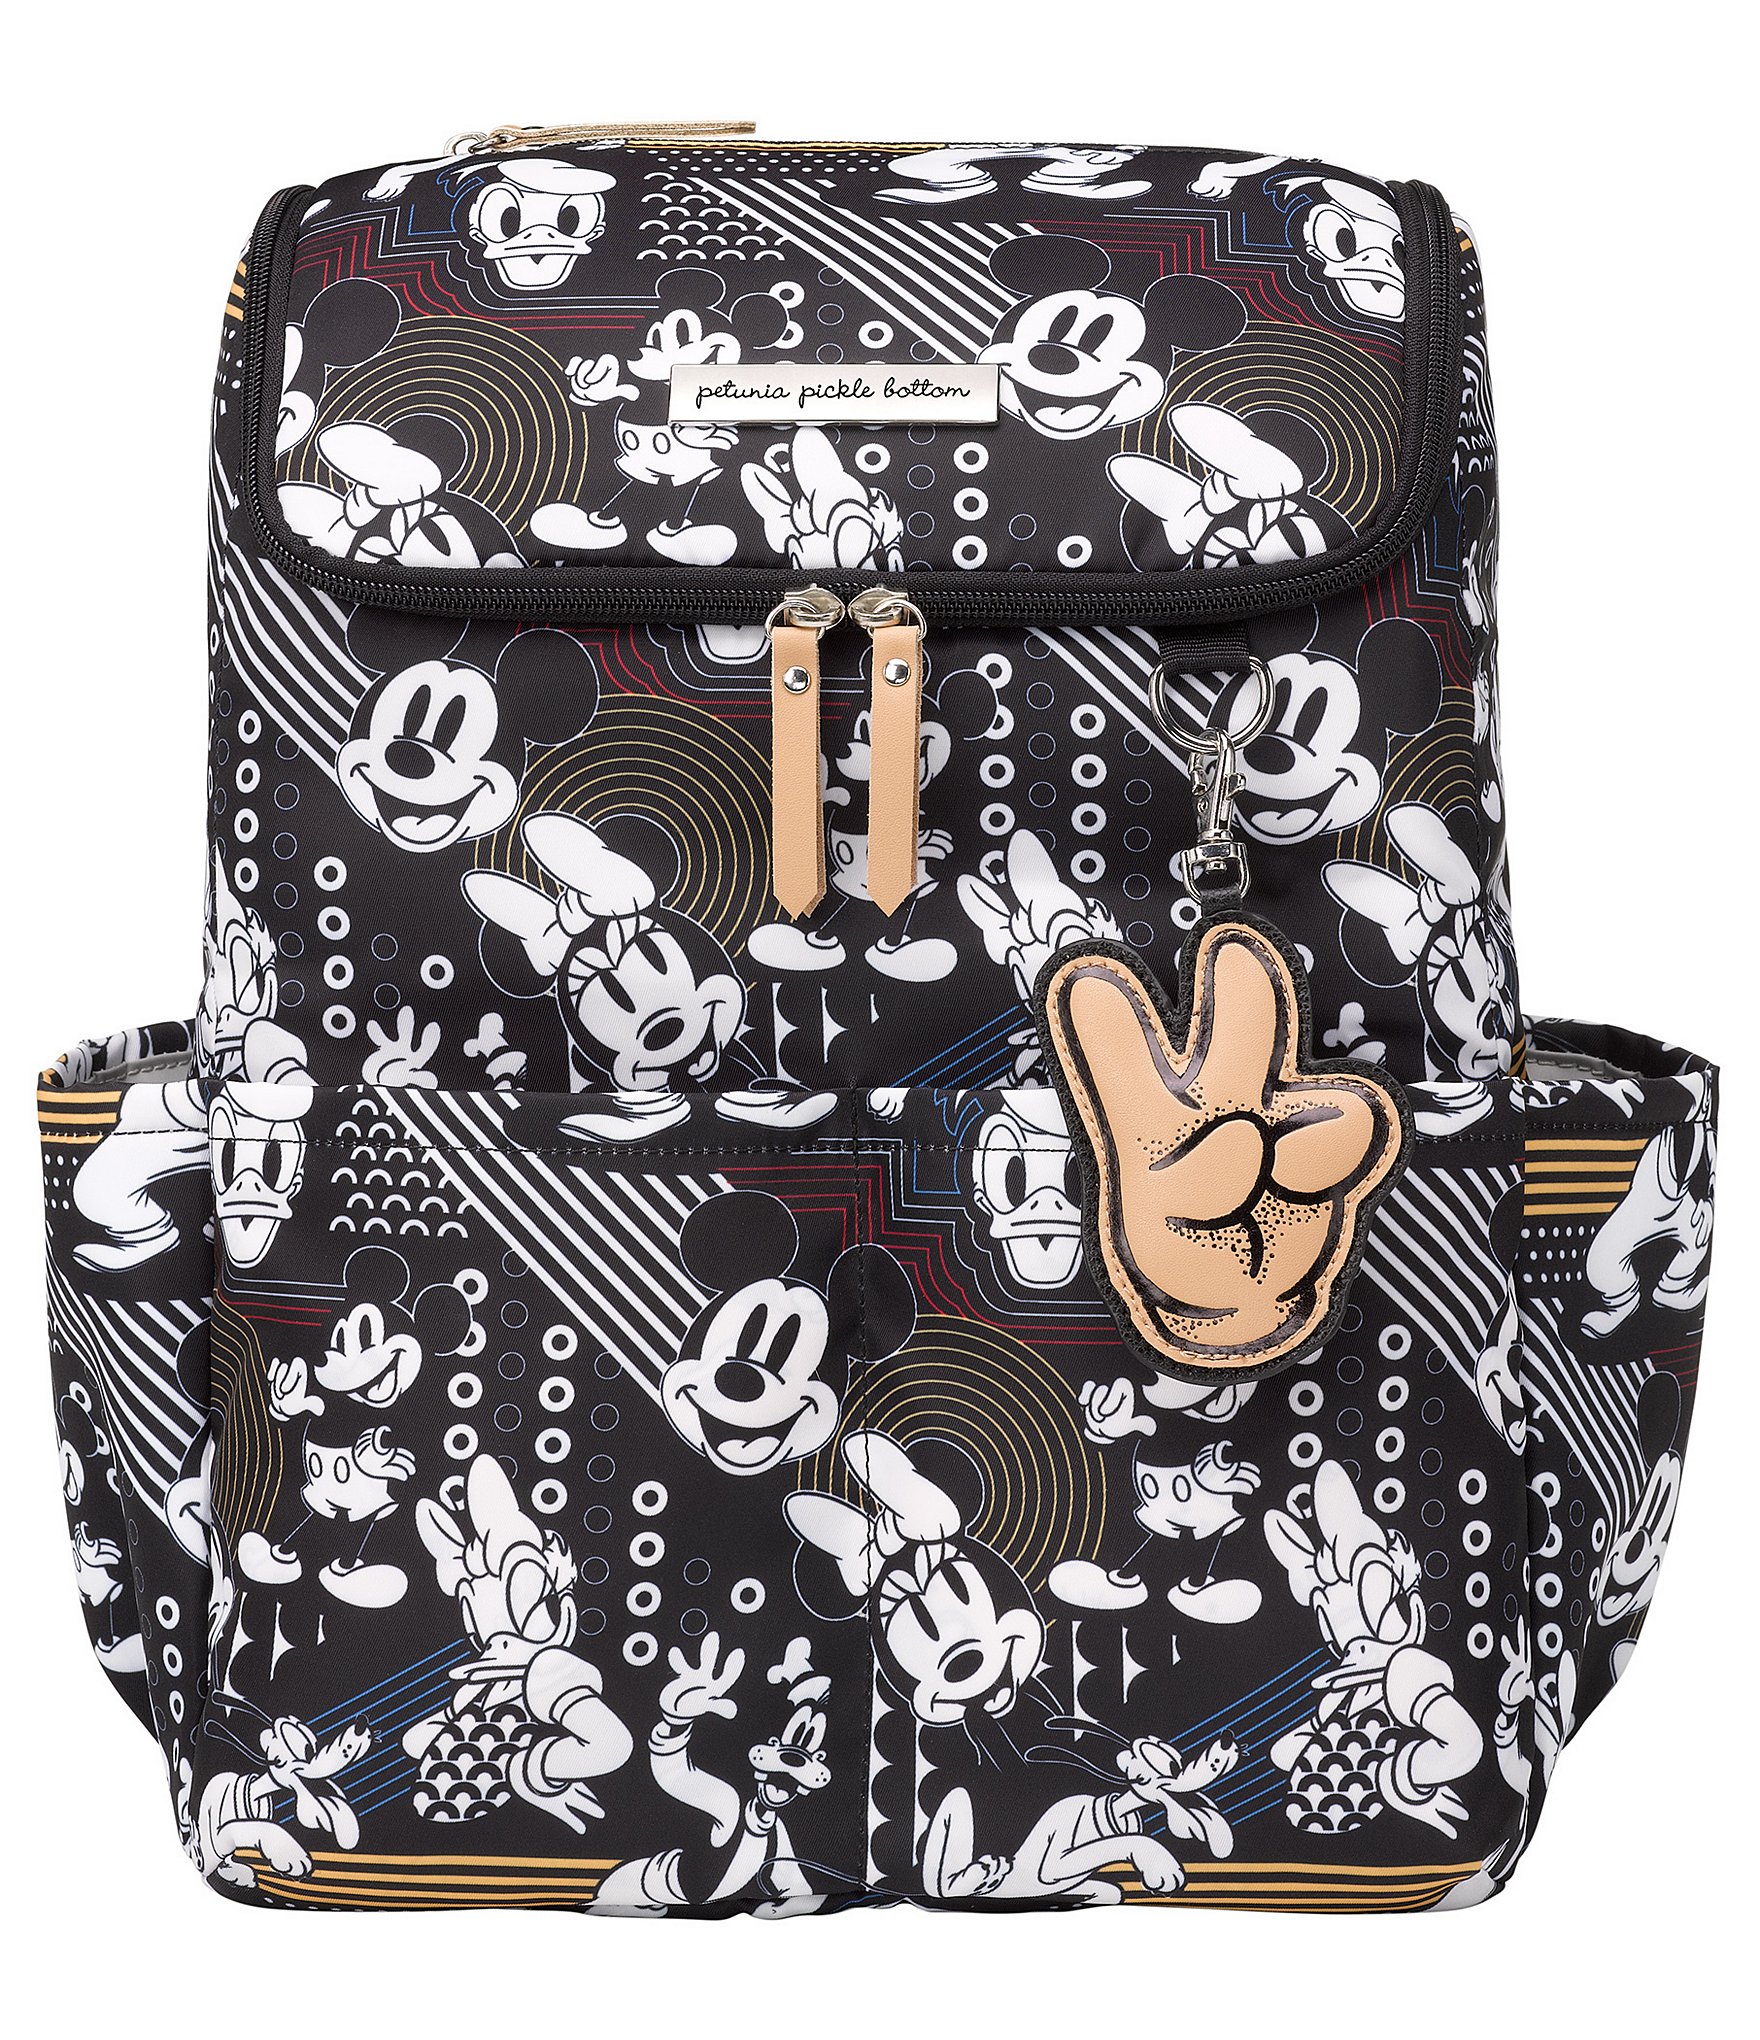 Petunia Pickle Bottom Method Backpack in Disney Mickey & Friends Good Times Collection, Black